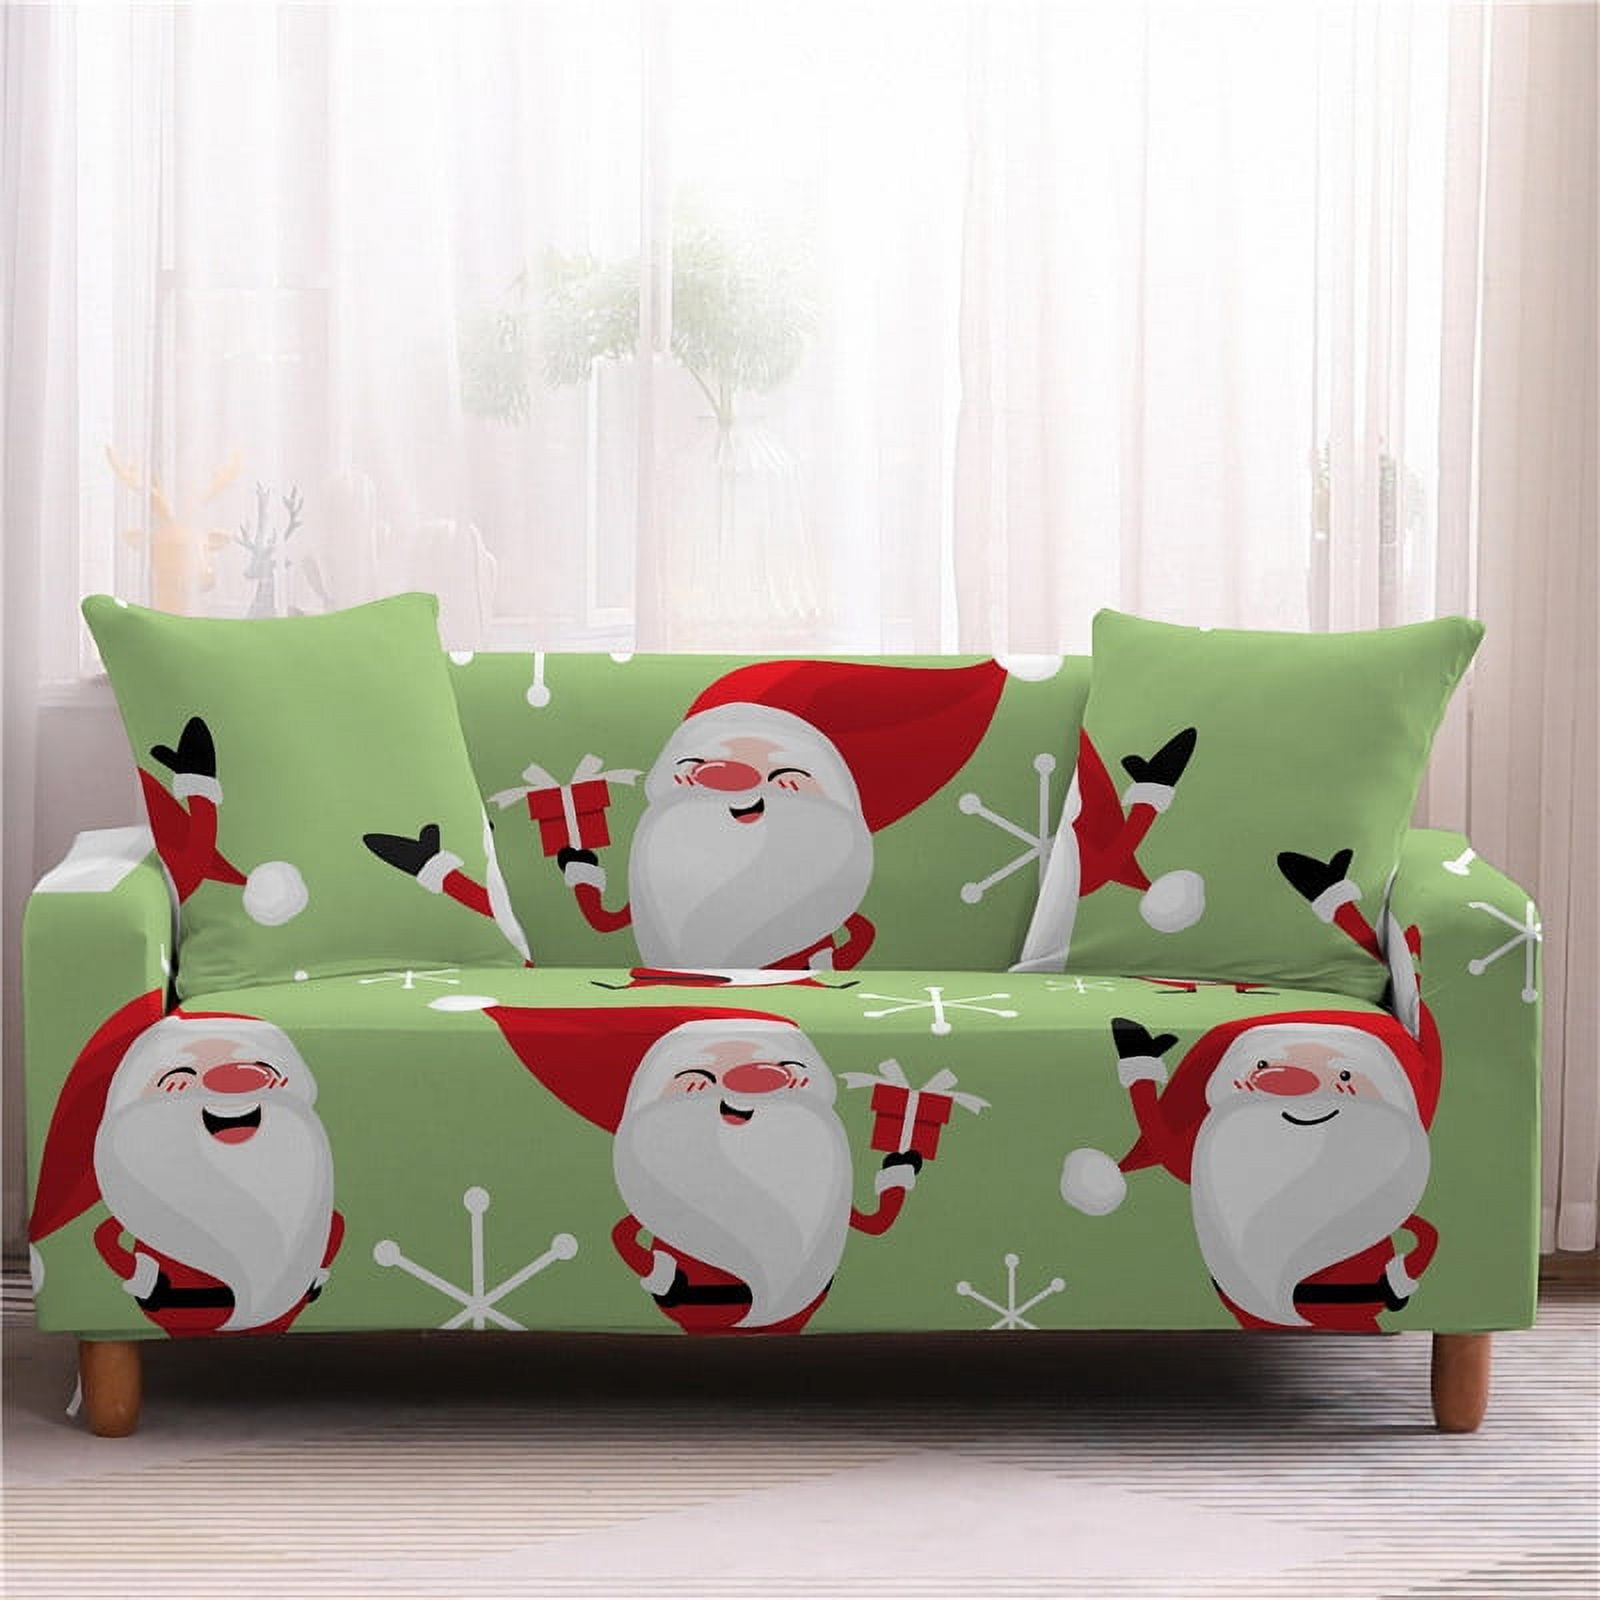 Christmas Sofa Covers,Sofa Cover 3 Seater,Furniture Protector,Digital  Christmas Printed Couch Cover Holiday Decoration,Washable Couch Cover Keep  Couch Cushions From Sliding,Christmas Home Decor 